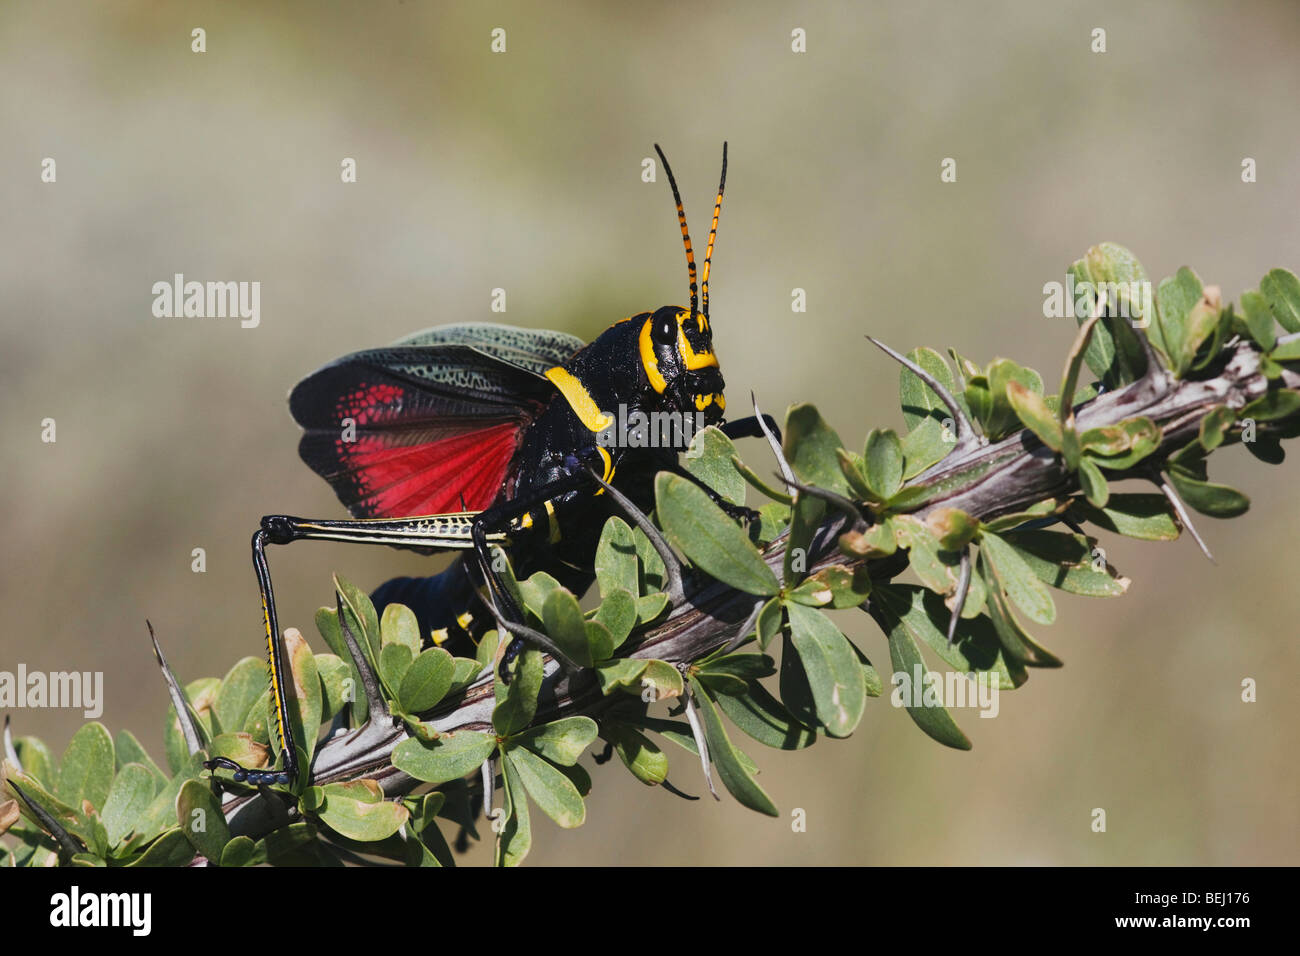 Horse Lubber Grasshopper (Taeniopoda eques), adult in defense pose on Ocotillo,Big Bend National Park, Chihuahuan Desert, Texas Stock Photo